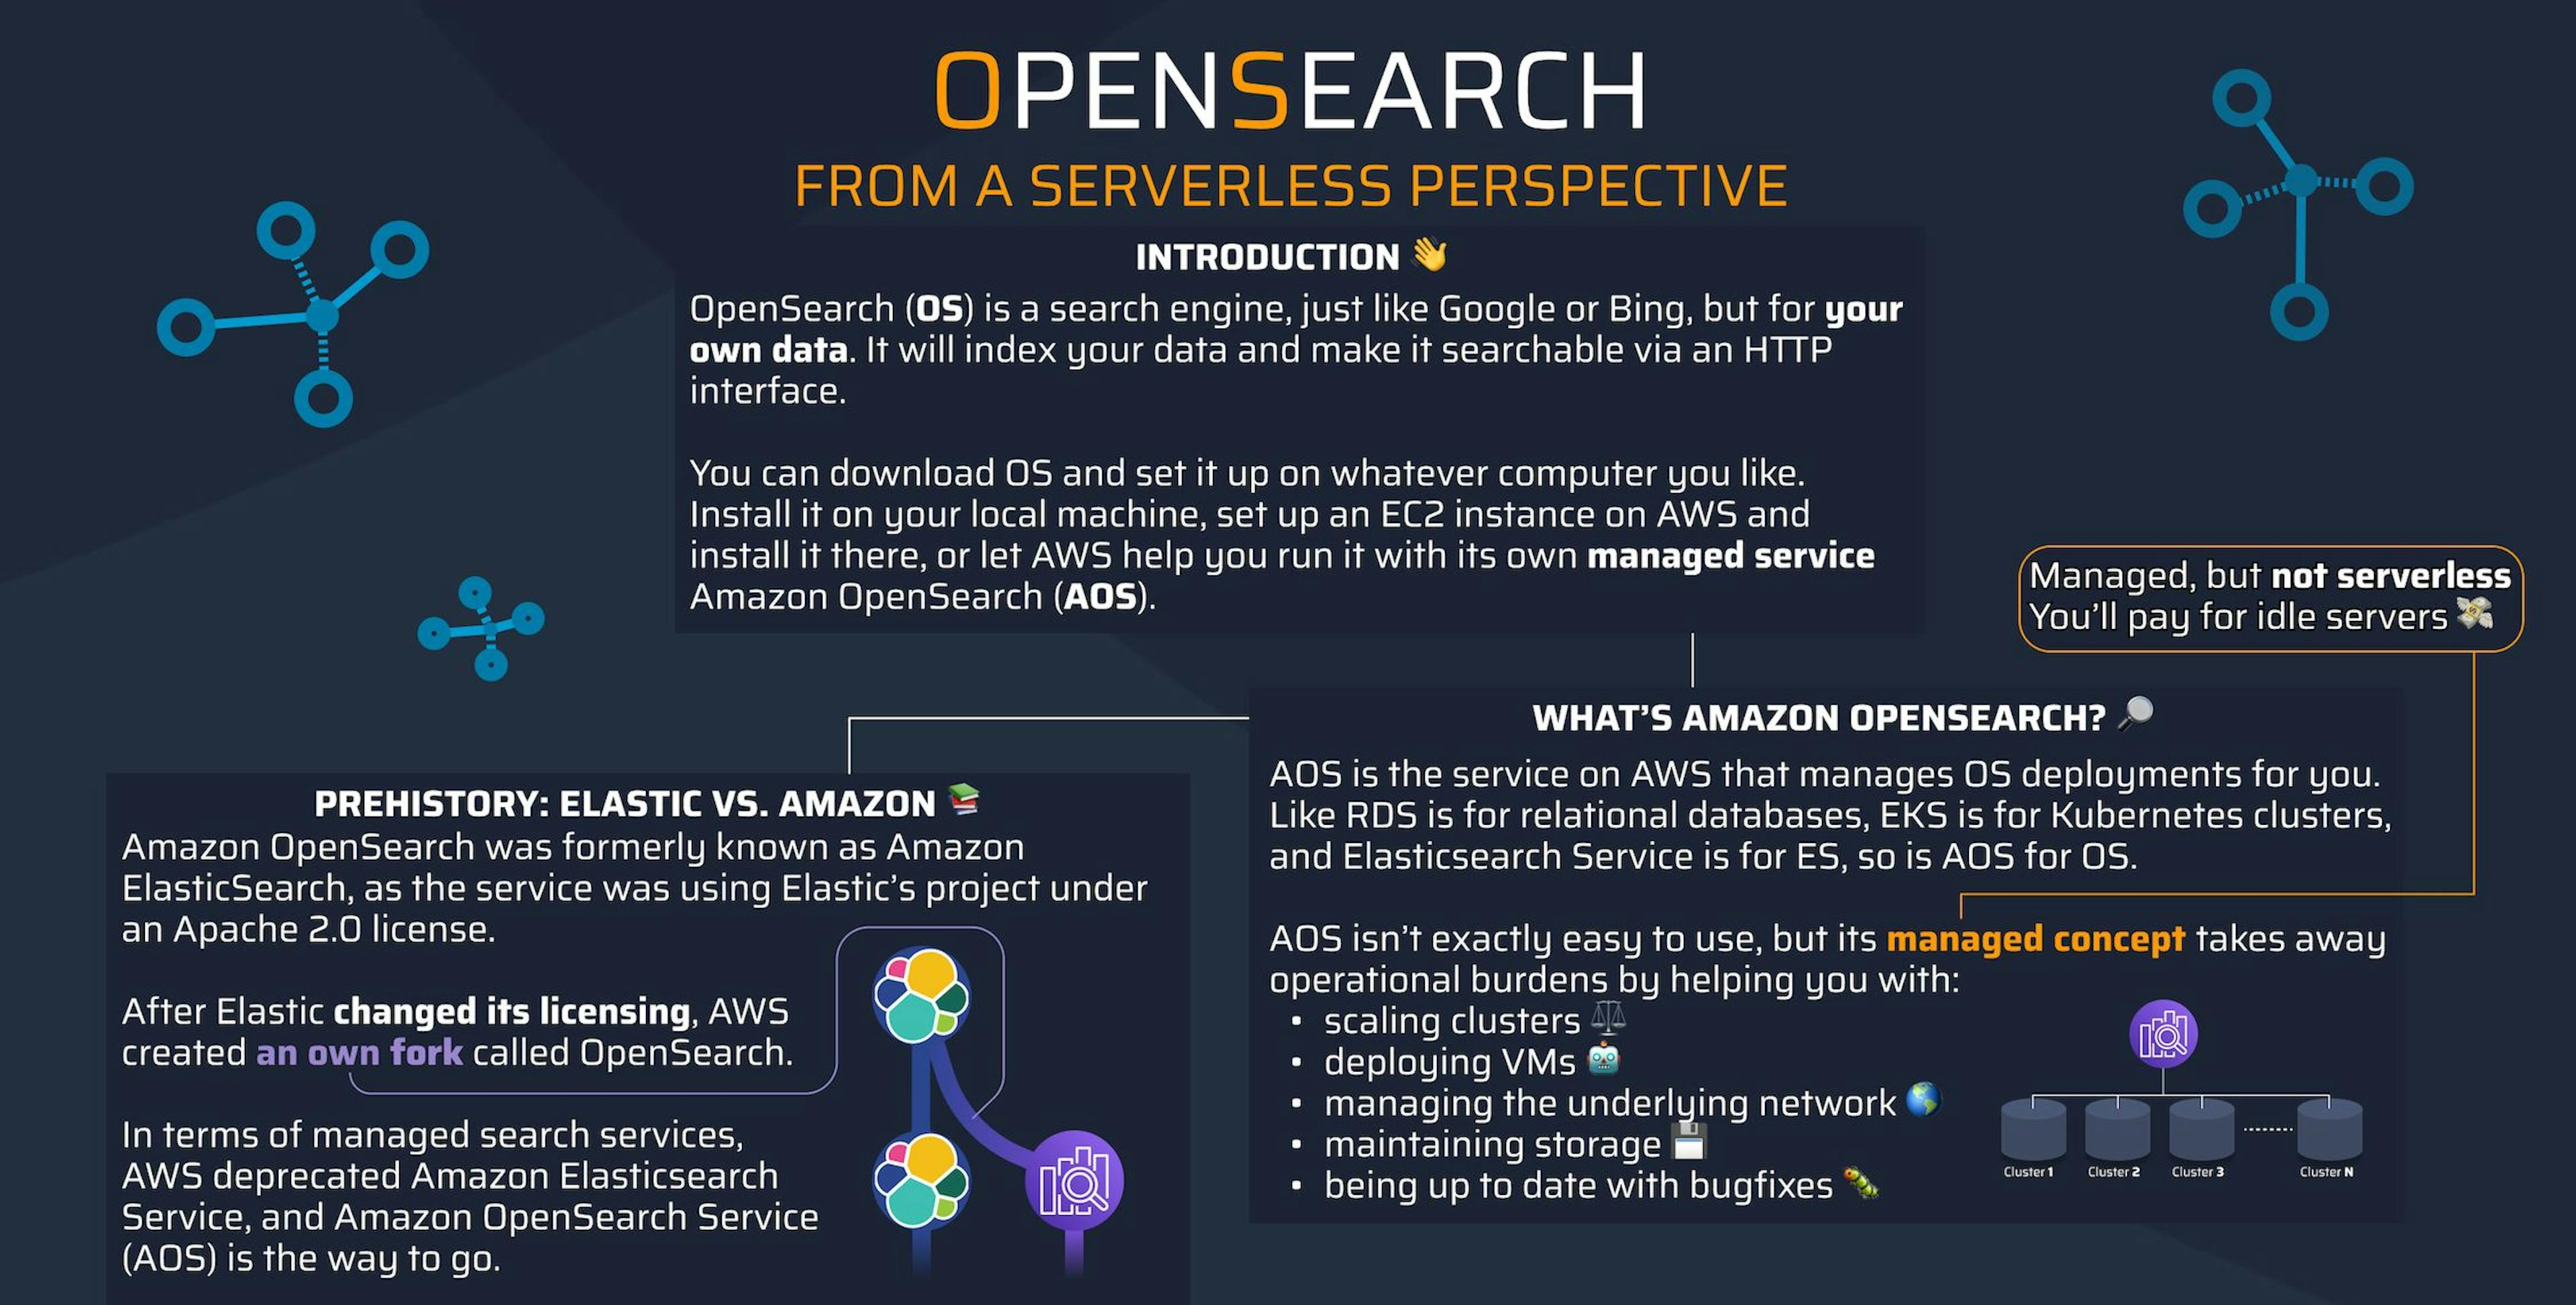 /opensearch-from-a-serverless-perspective feature image